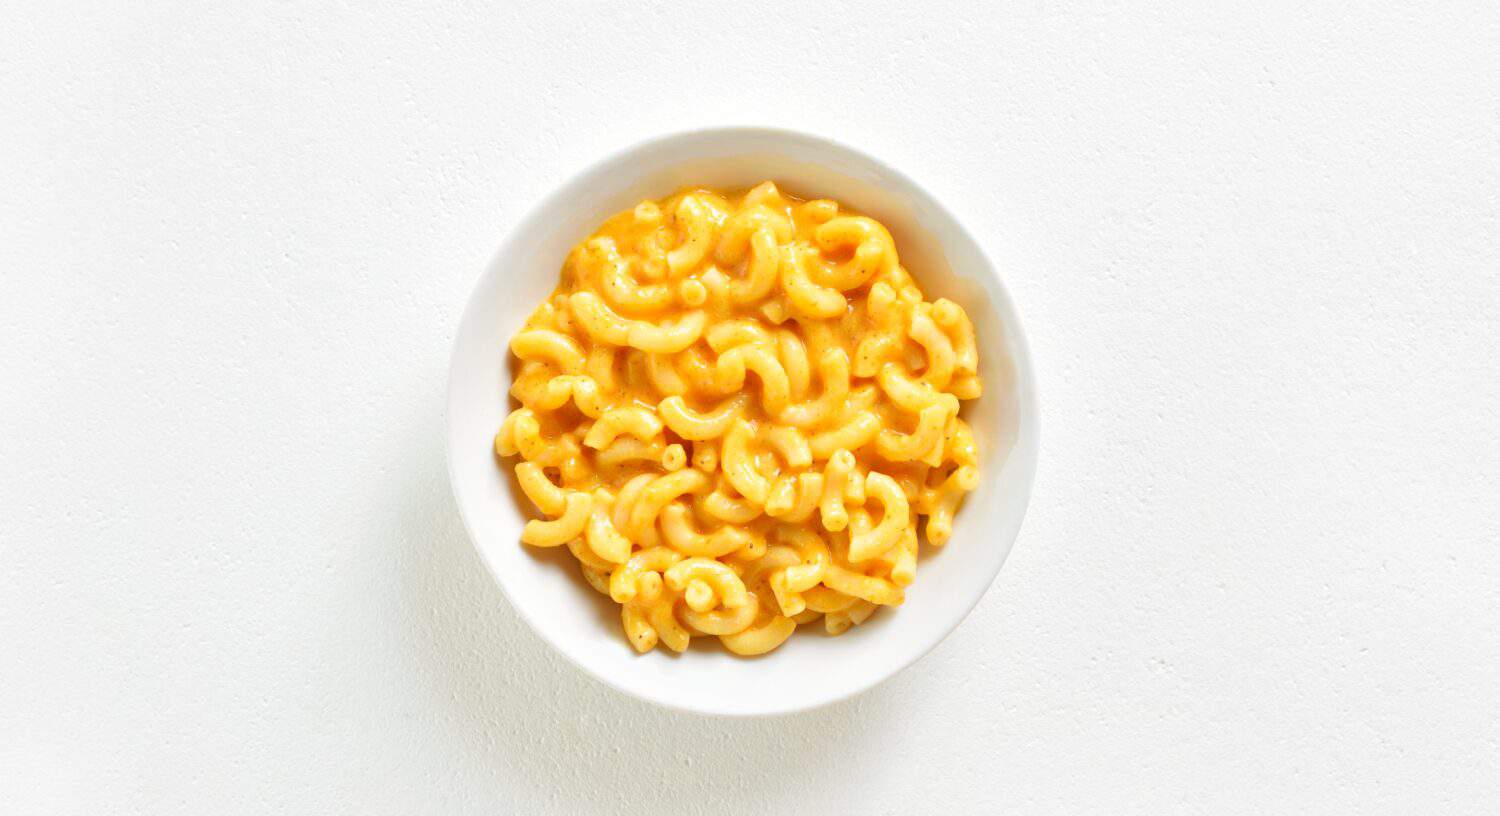 Macaroni and cheese in bowl over white background with copy space. Top view, flat lay